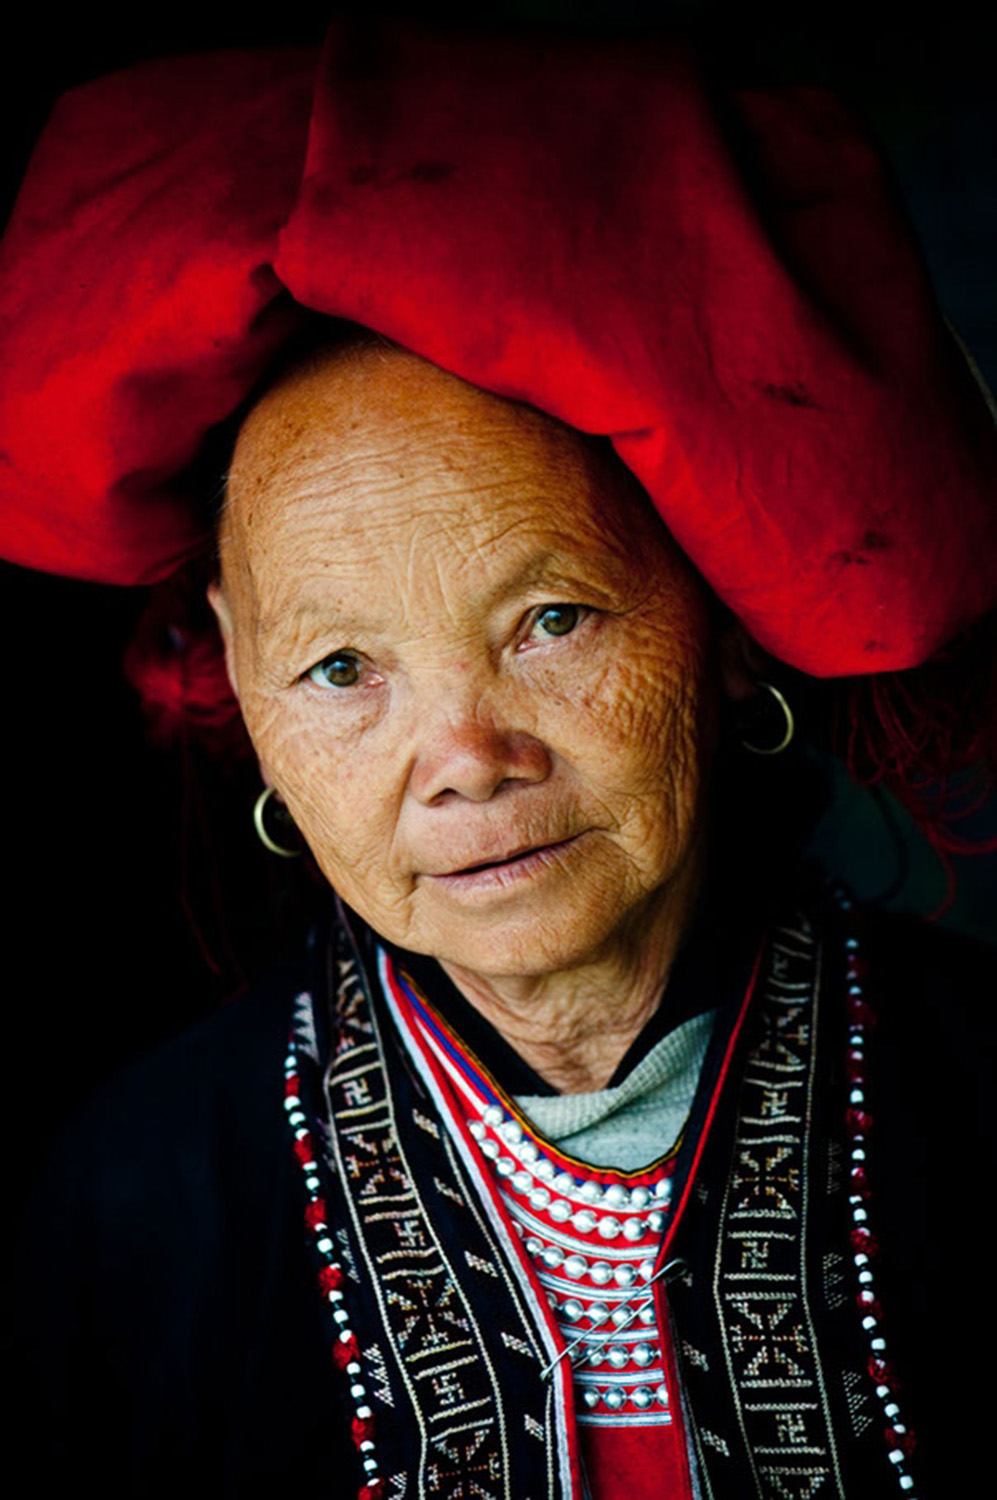 image of AARONTAIT COPYRIGHTED 2014 295 TRAVEL PHOTOGRAPHER ASIA REPORTAGE EDITORIAL STORY HUMANS LIFE EARTH TRAVELER EXPLORE CULTURE PEOPLE COUNTRY NATIONALITY DOCUMENTARY VIETNAM HMONG WOMAN ELDER